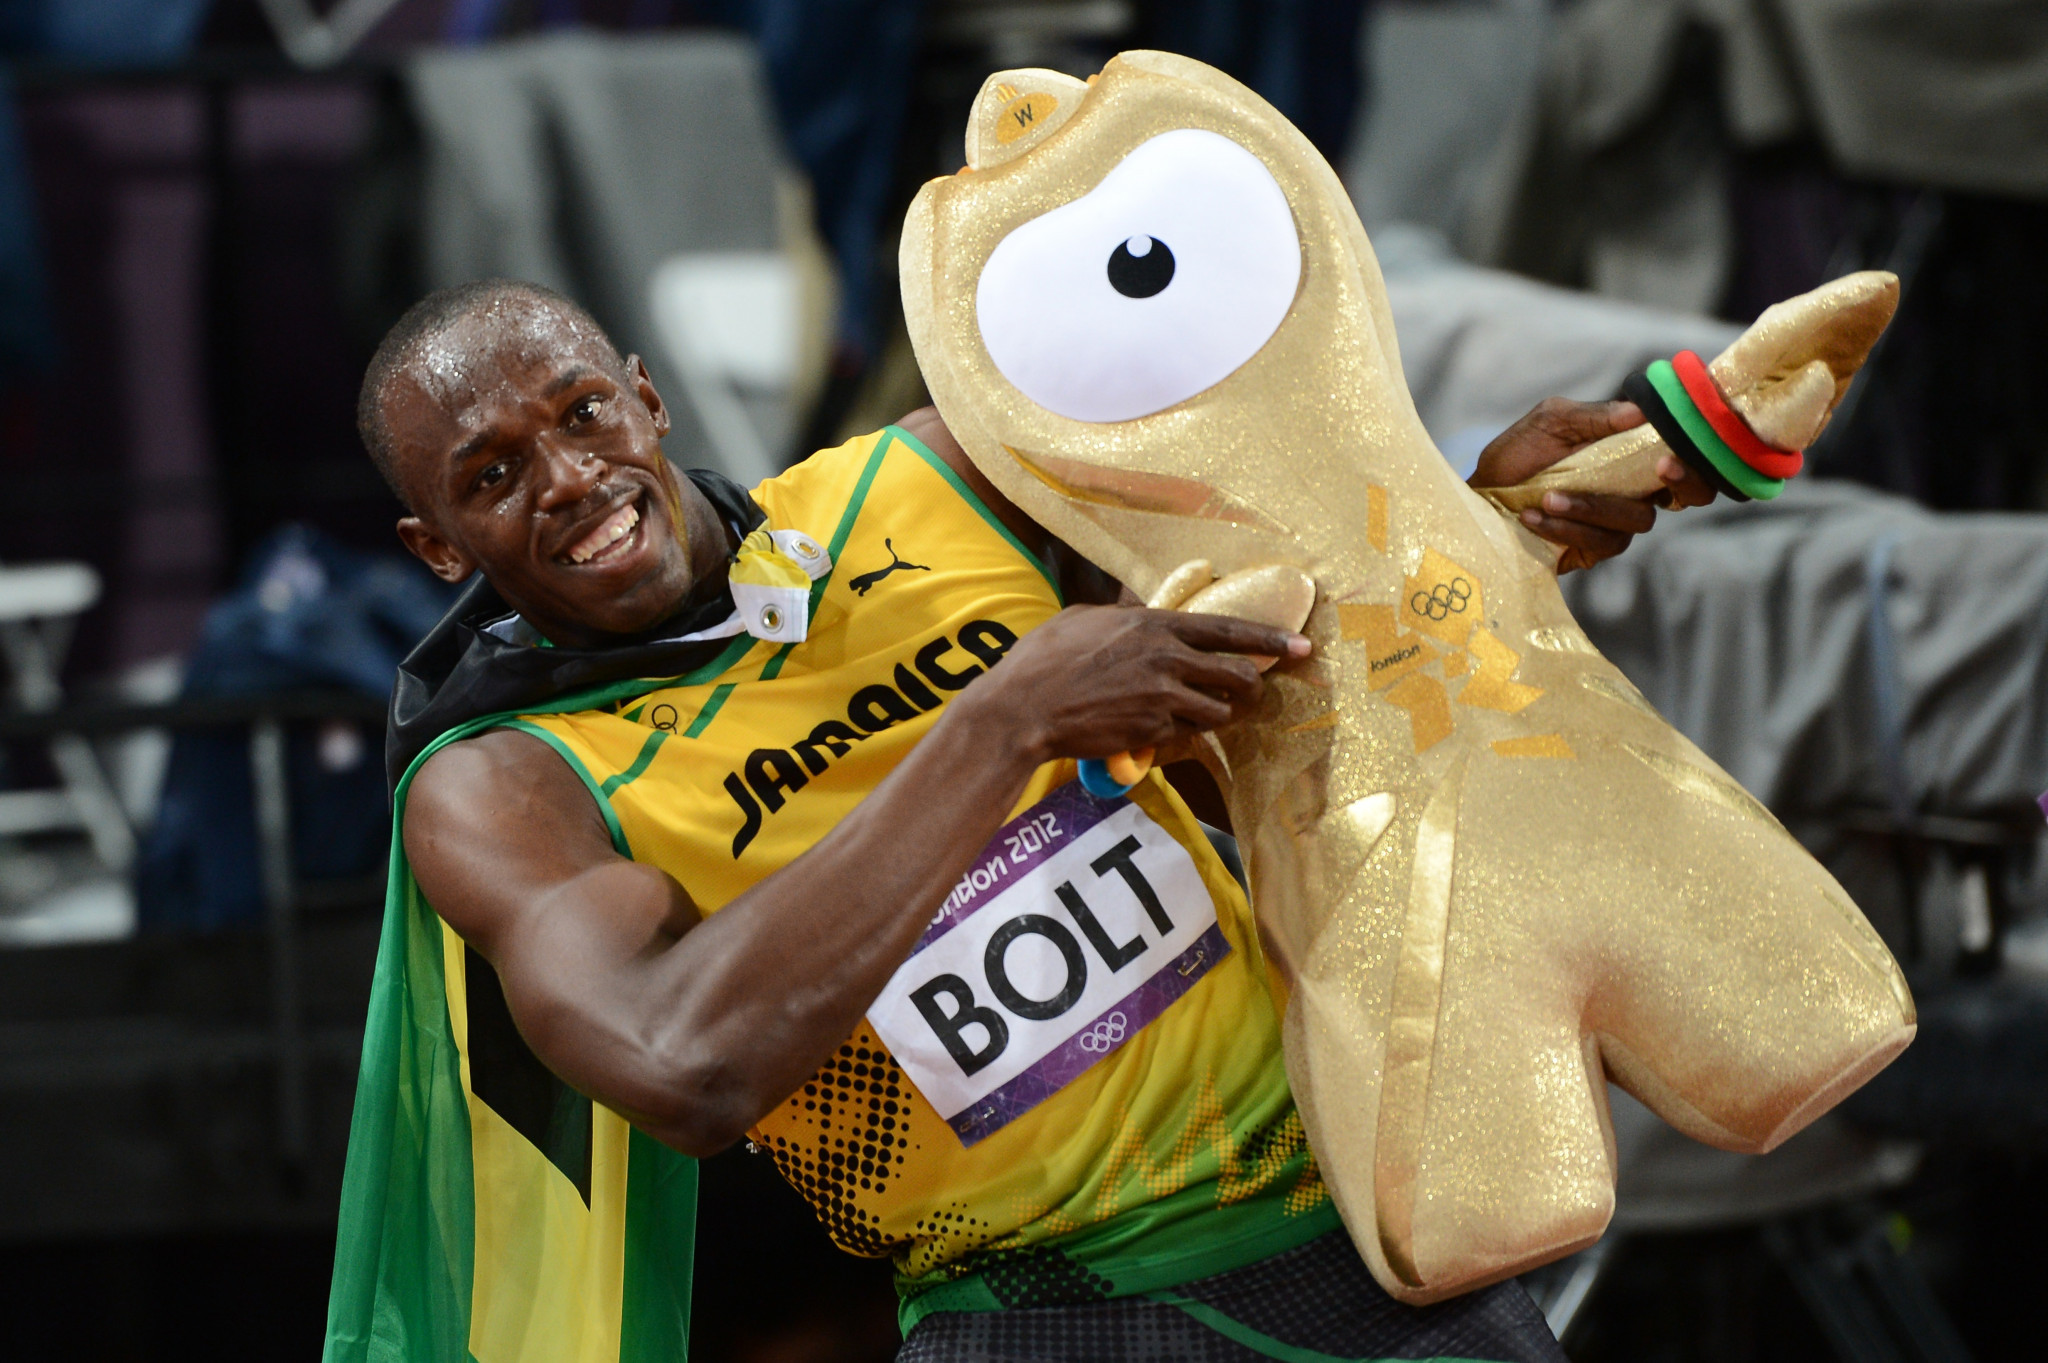 One of the London 2012 mascots was named Wenlock as a hat tip to the Wenlock Olympian Games ©Getty Images